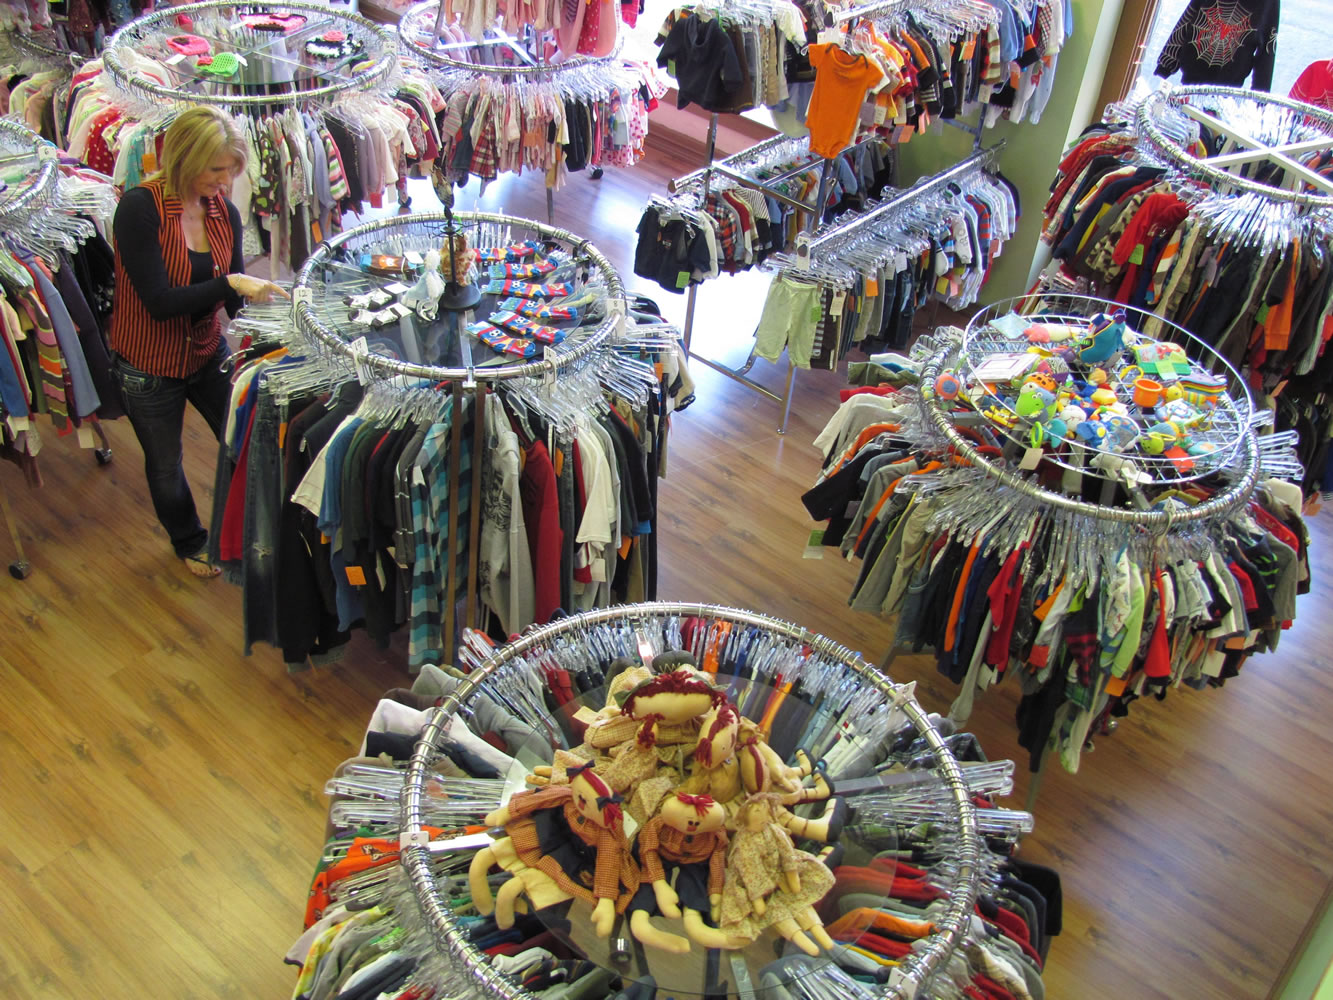 Robin Simonds, manager of Lil' Dudes and Divas, arranges racks of &quot;gently used&quot; children's outfits in the downtown Camas shop. New clothing and accessories are displayed along the walls. Toys, games and baby strollers are also available, and there are handcrafted items made by area crafters. Art classes for toddlers will be offered, starting in November.